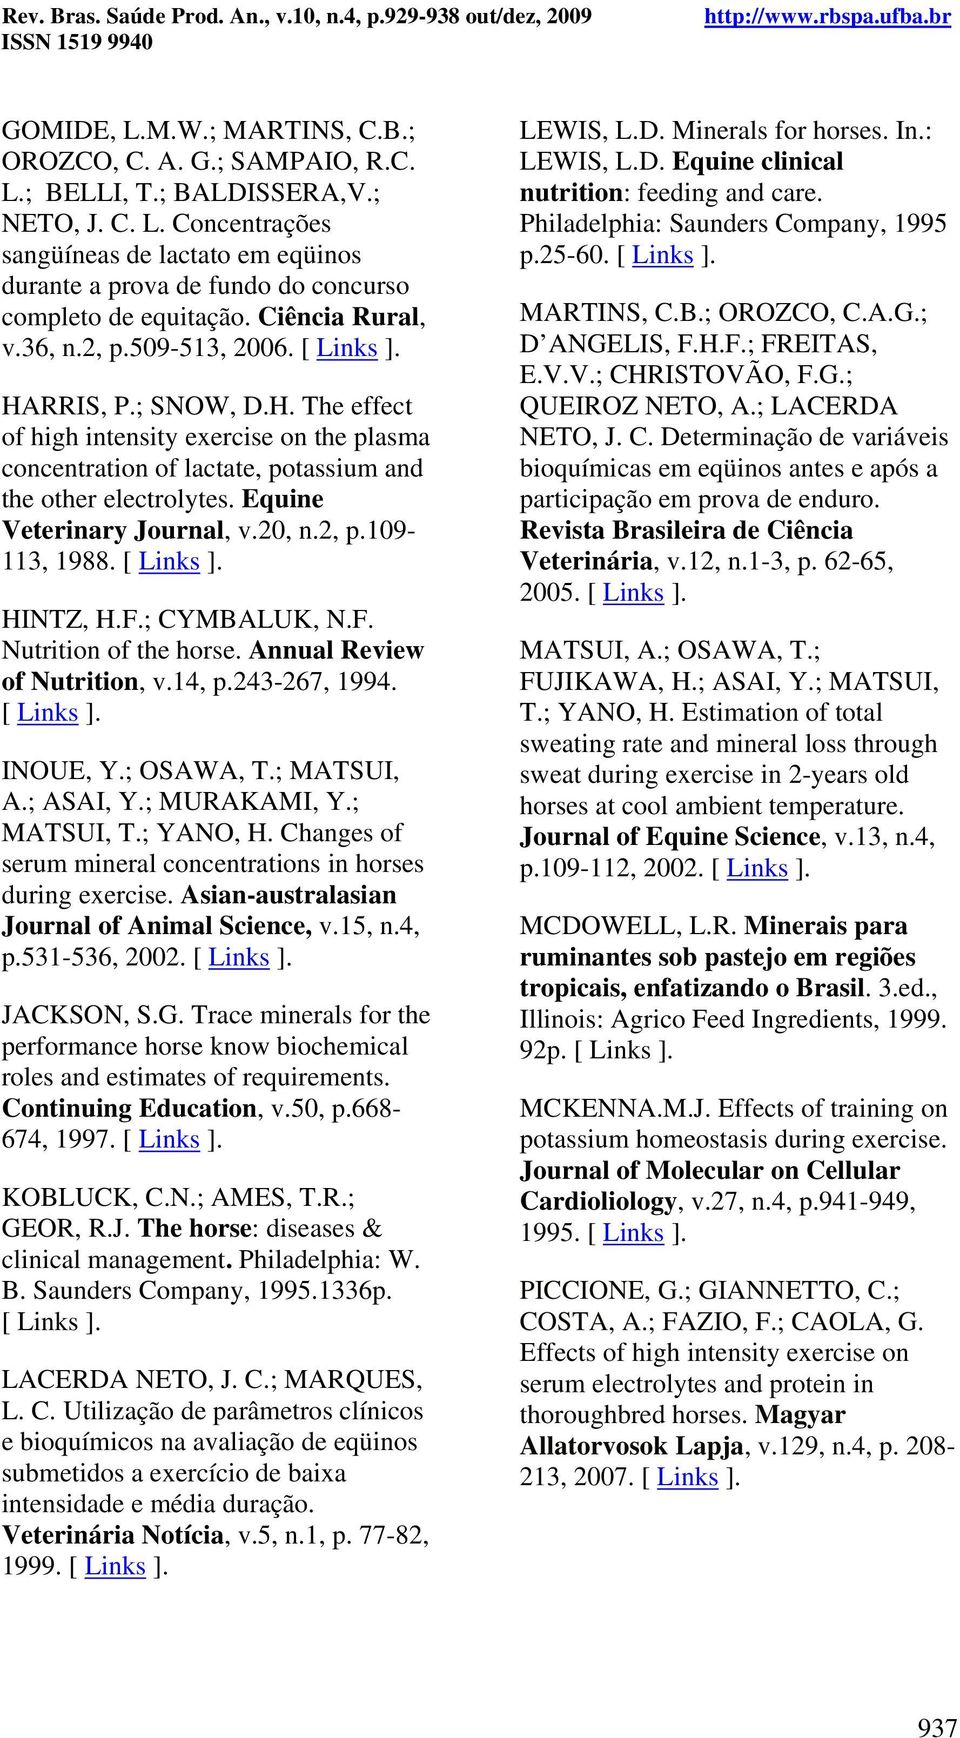 Equine Veterinary Journal, v.20, n.2, p.109-113, 1988. [ Links ]. HINTZ, H.F.; CYMBALUK, N.F. Nutrition of the horse. Annual Review of Nutrition, v.14, p.243-267, 1994. [ Links ]. INOUE, Y.; OSAWA, T.